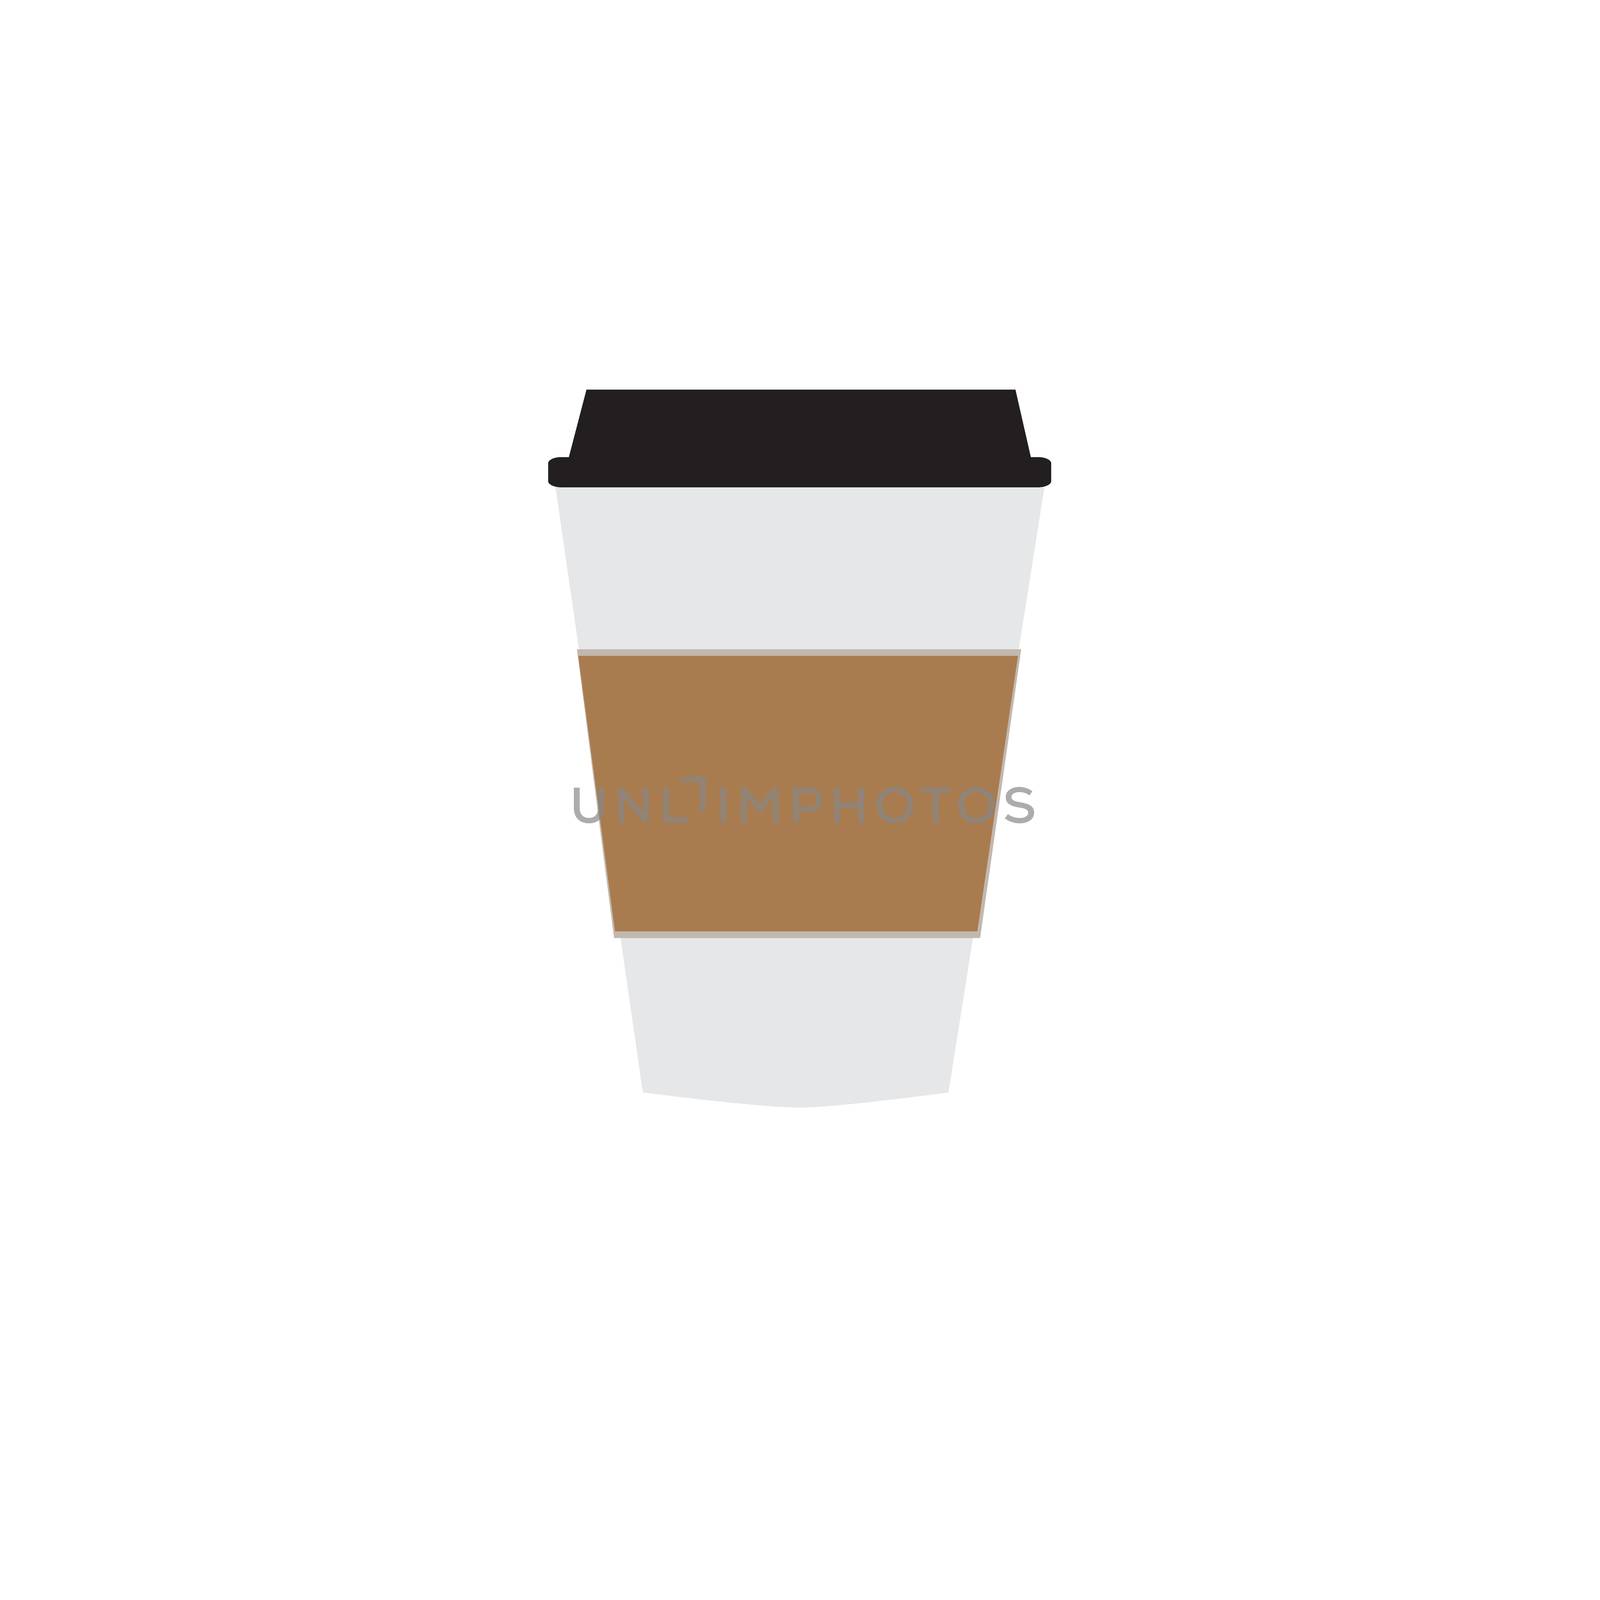 Disposable coffee cup icon on white background. flat style. coff by suthee